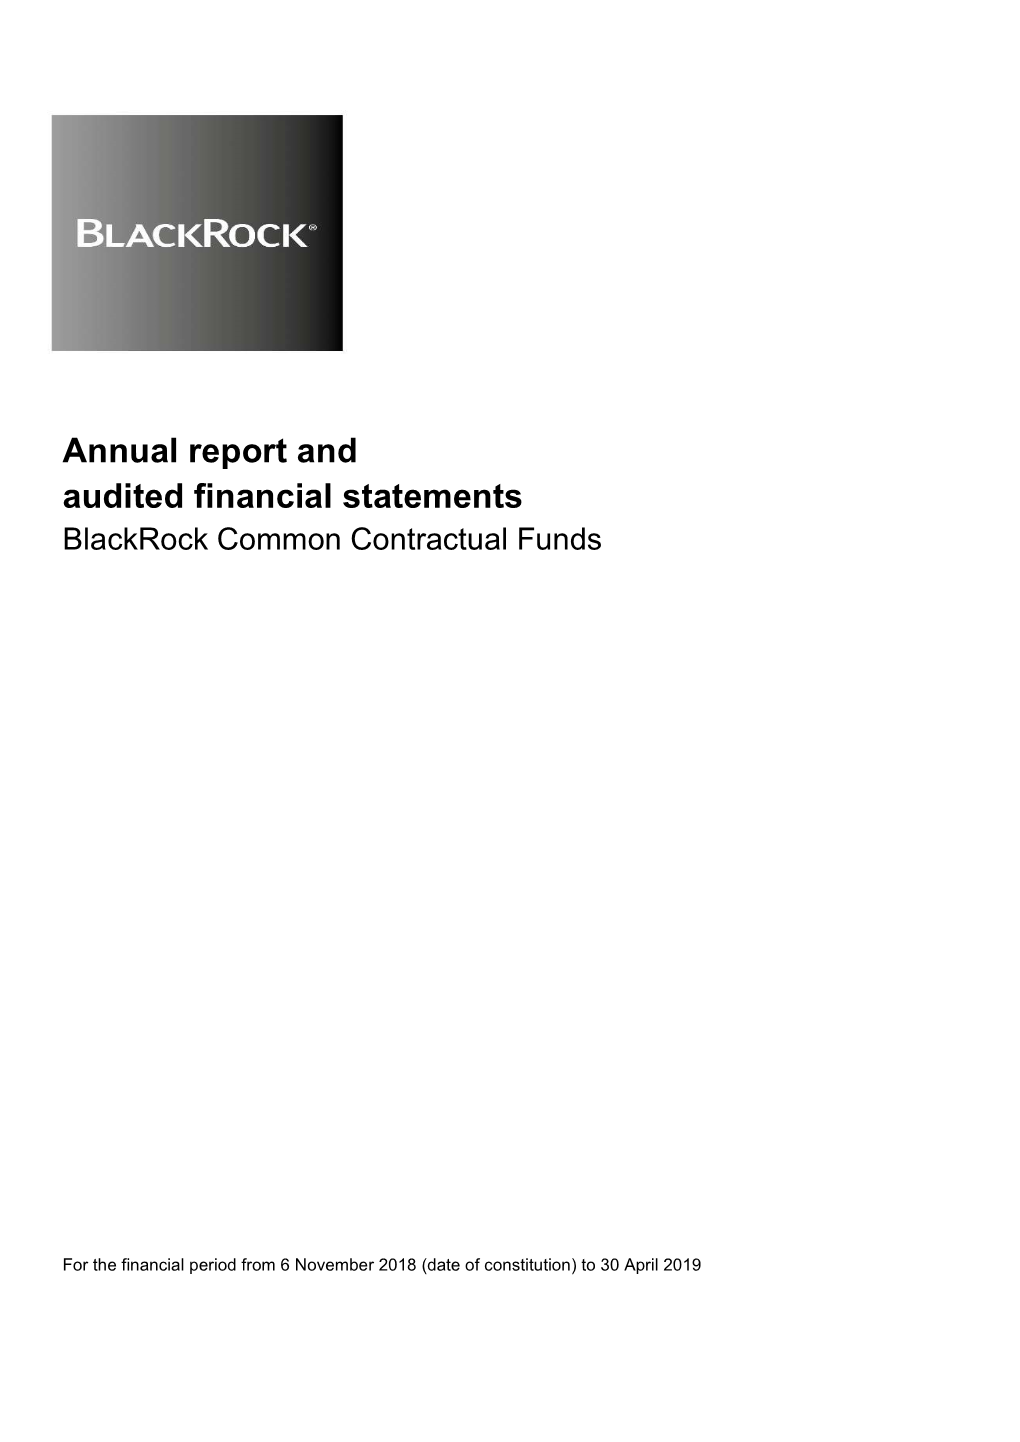 Annual Report and Audited Financial Statements Blackrock Common Contractual Funds